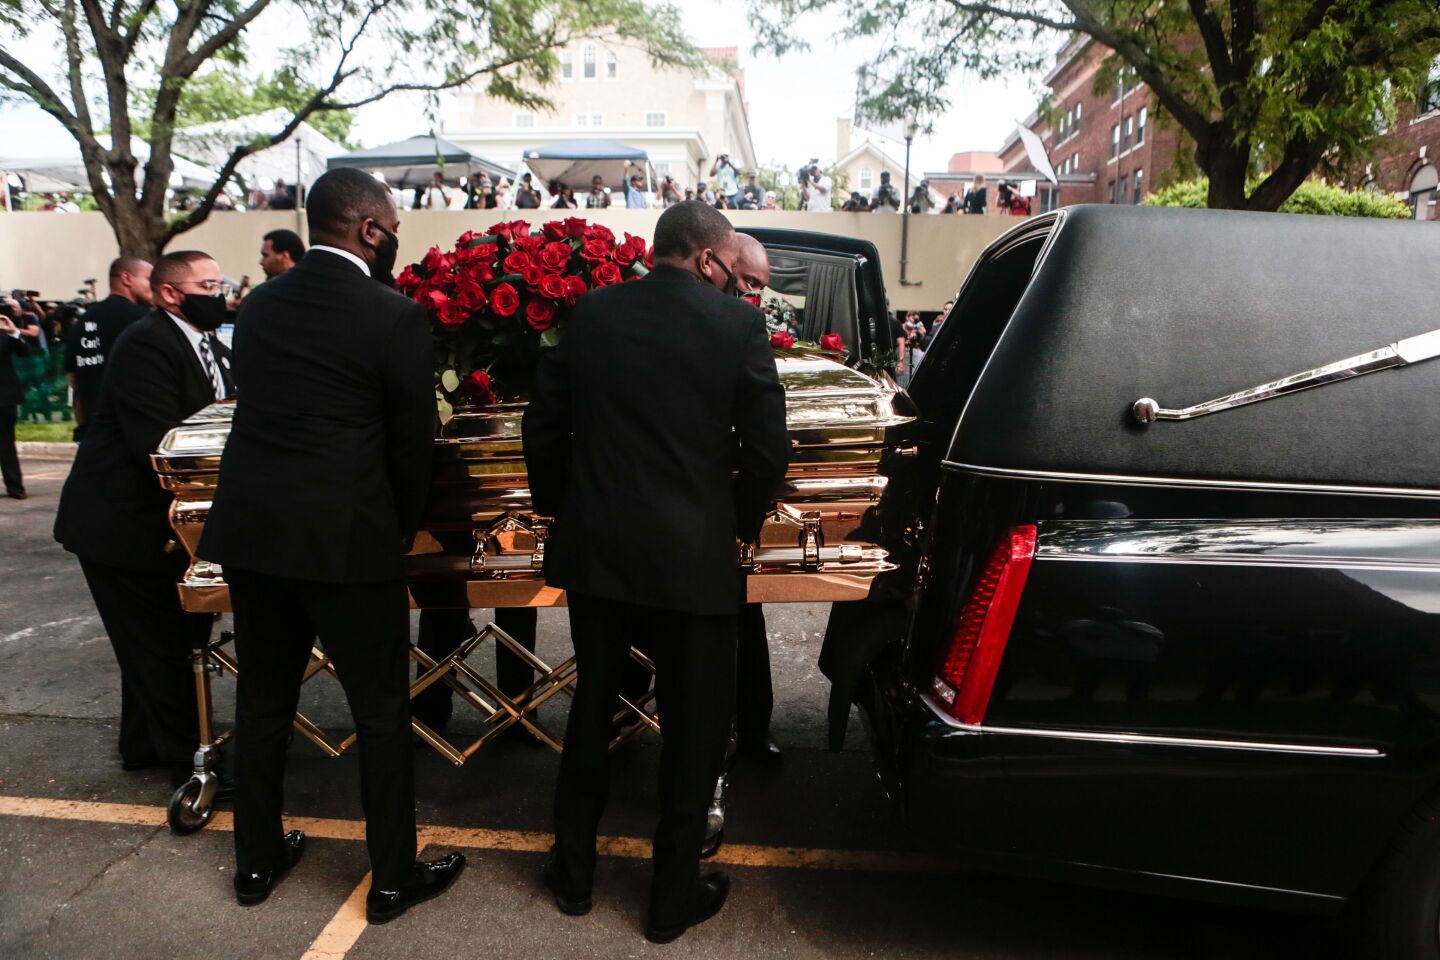 George Floyd's casket is placed into a hearse